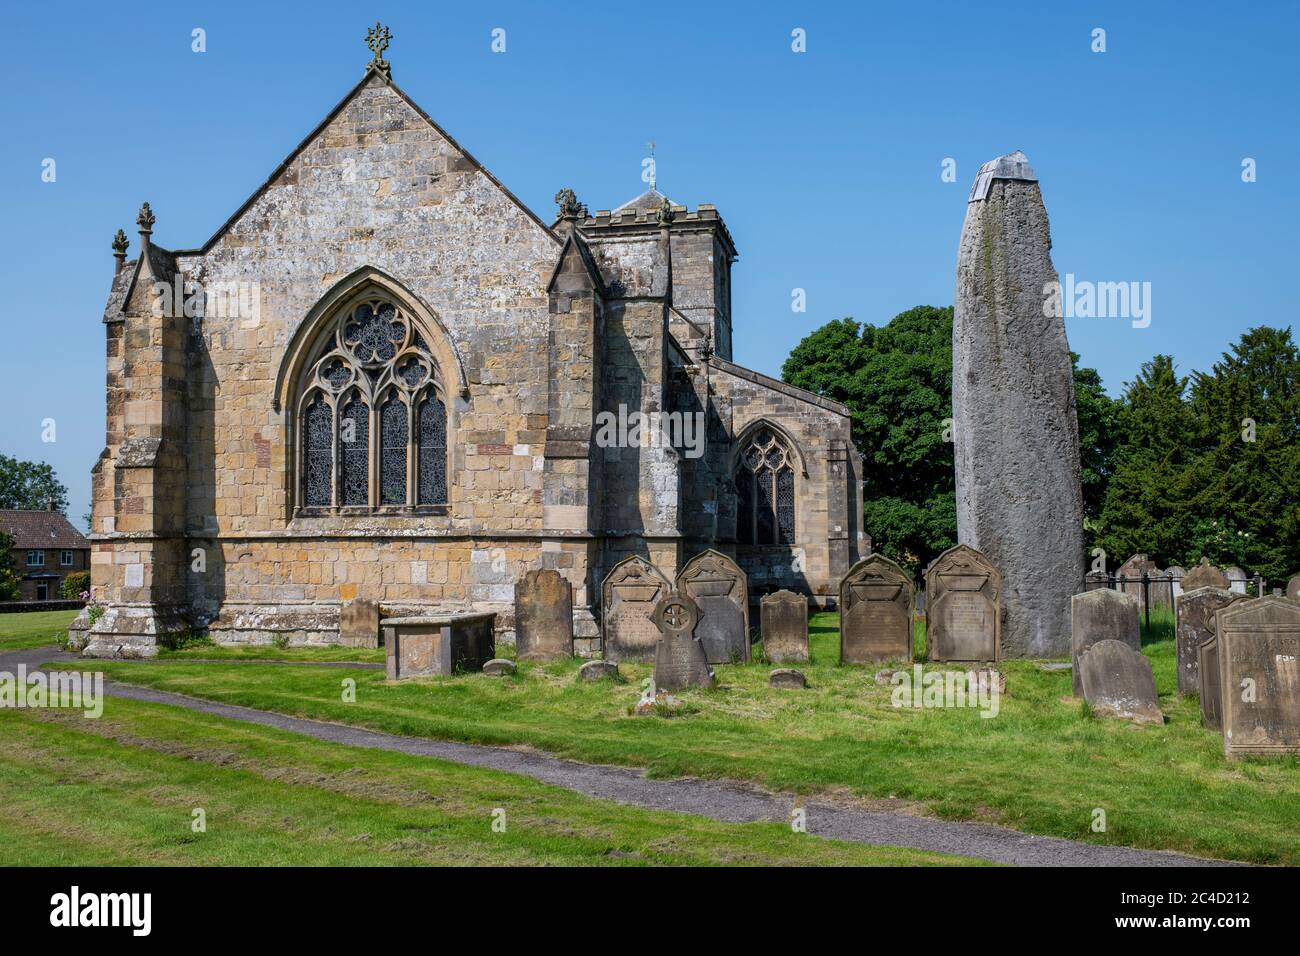 All Saints church beside the tallest (25 feet) Monolithic stone in GB, Rudston, East Yorkshire, UK Stock Photo